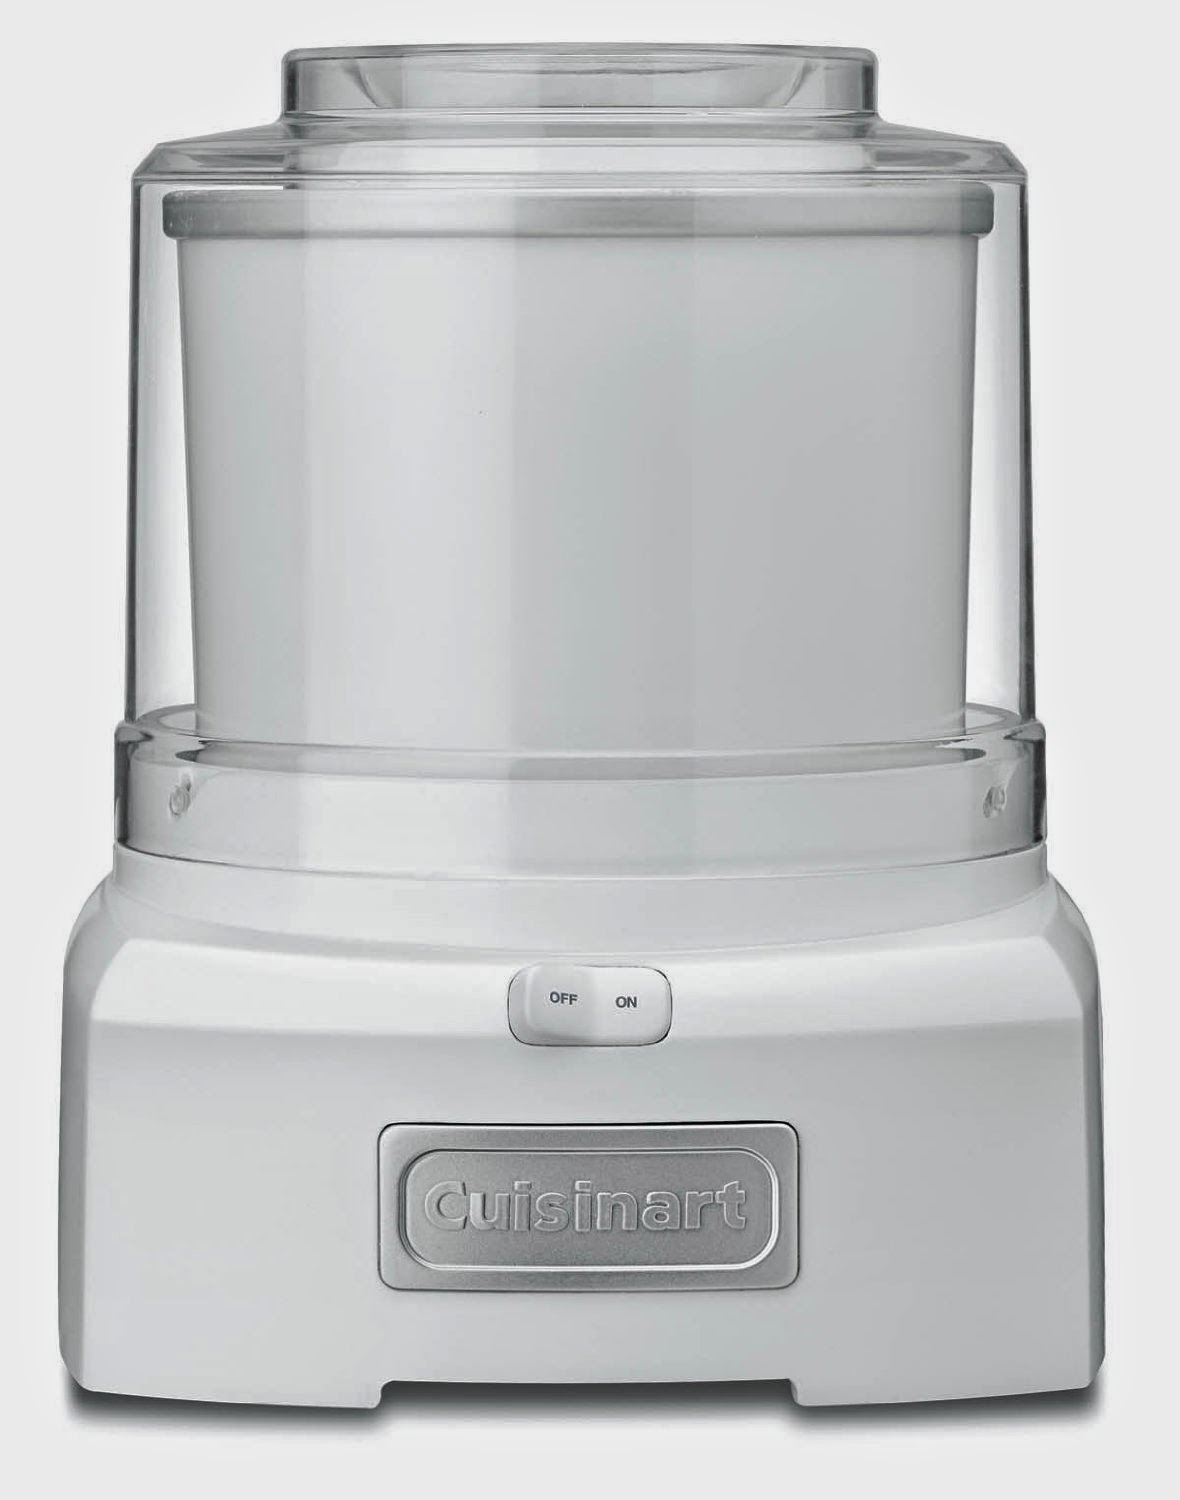 Cuisinart ICE-21 Frozen Yogurt-Ice Cream & Sorbet Maker, picture, image, review features and specifications